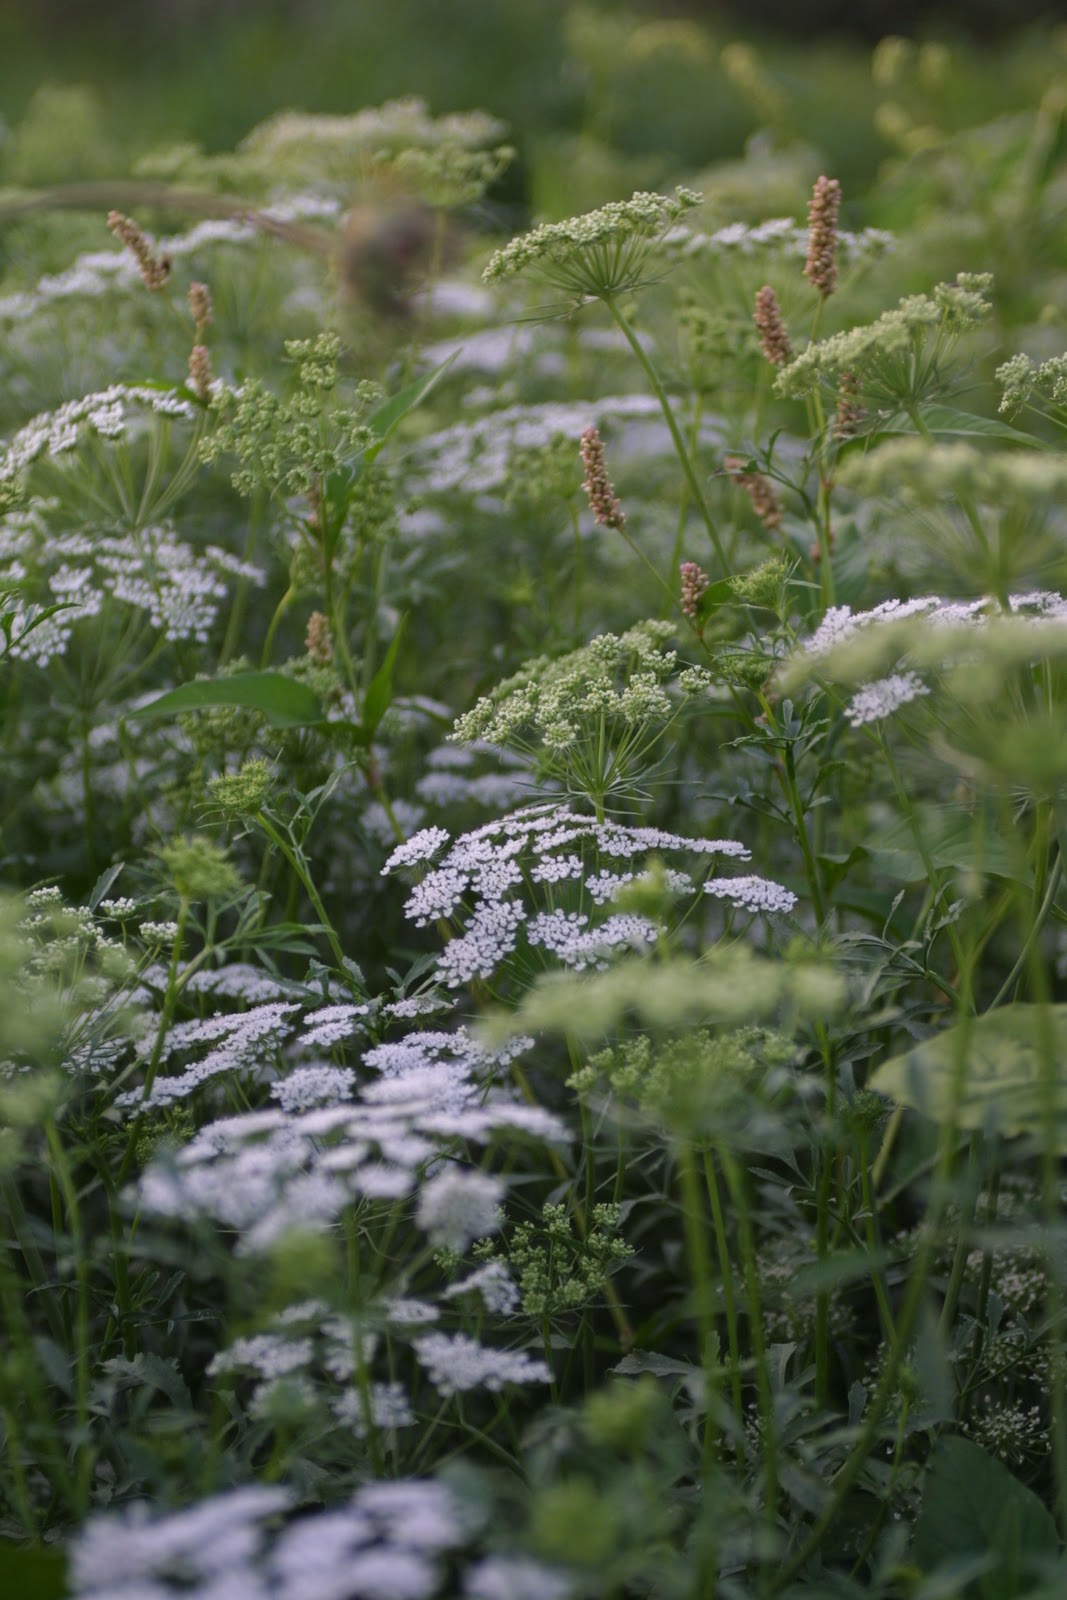 Queen Anne's Lace growing in the field